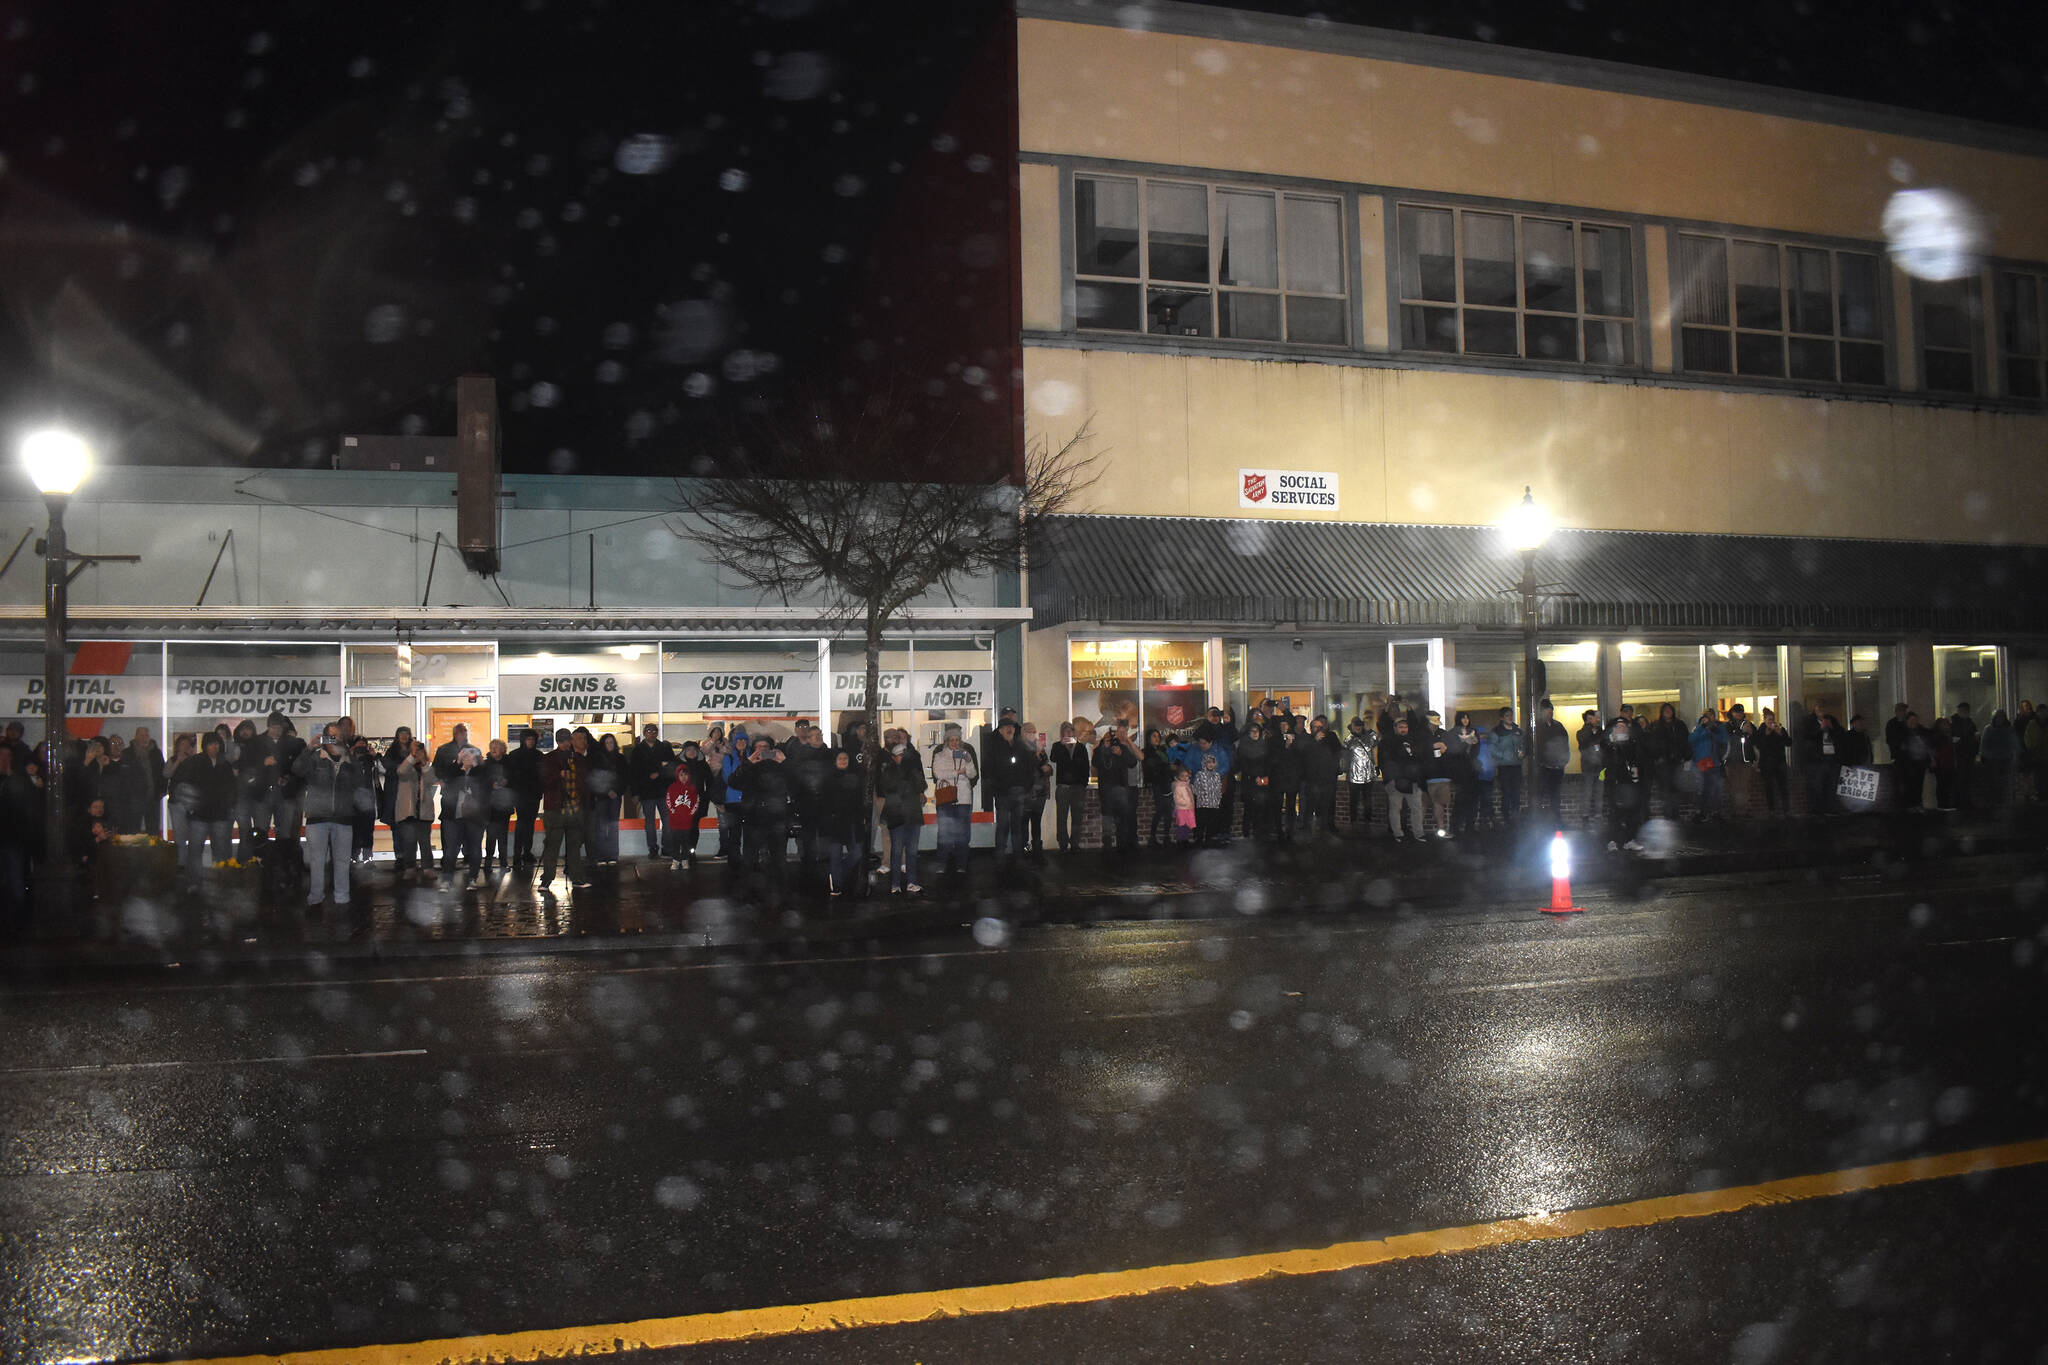 Matthew N. Wells / The Daily World
A large crowd — estimated to be at least 200 people — lined the sidewalk between the South K and West Wishkah intersection and the Salvation Army Thrift Store in order to view the lighting of the Side One Building on Feb. 20, 2023. Dani Bacon, one of the building’s owners, helped organize the event. She, and two other experienced event planners, will host a community events forum to help people with tips and guidance for hosting their own events.